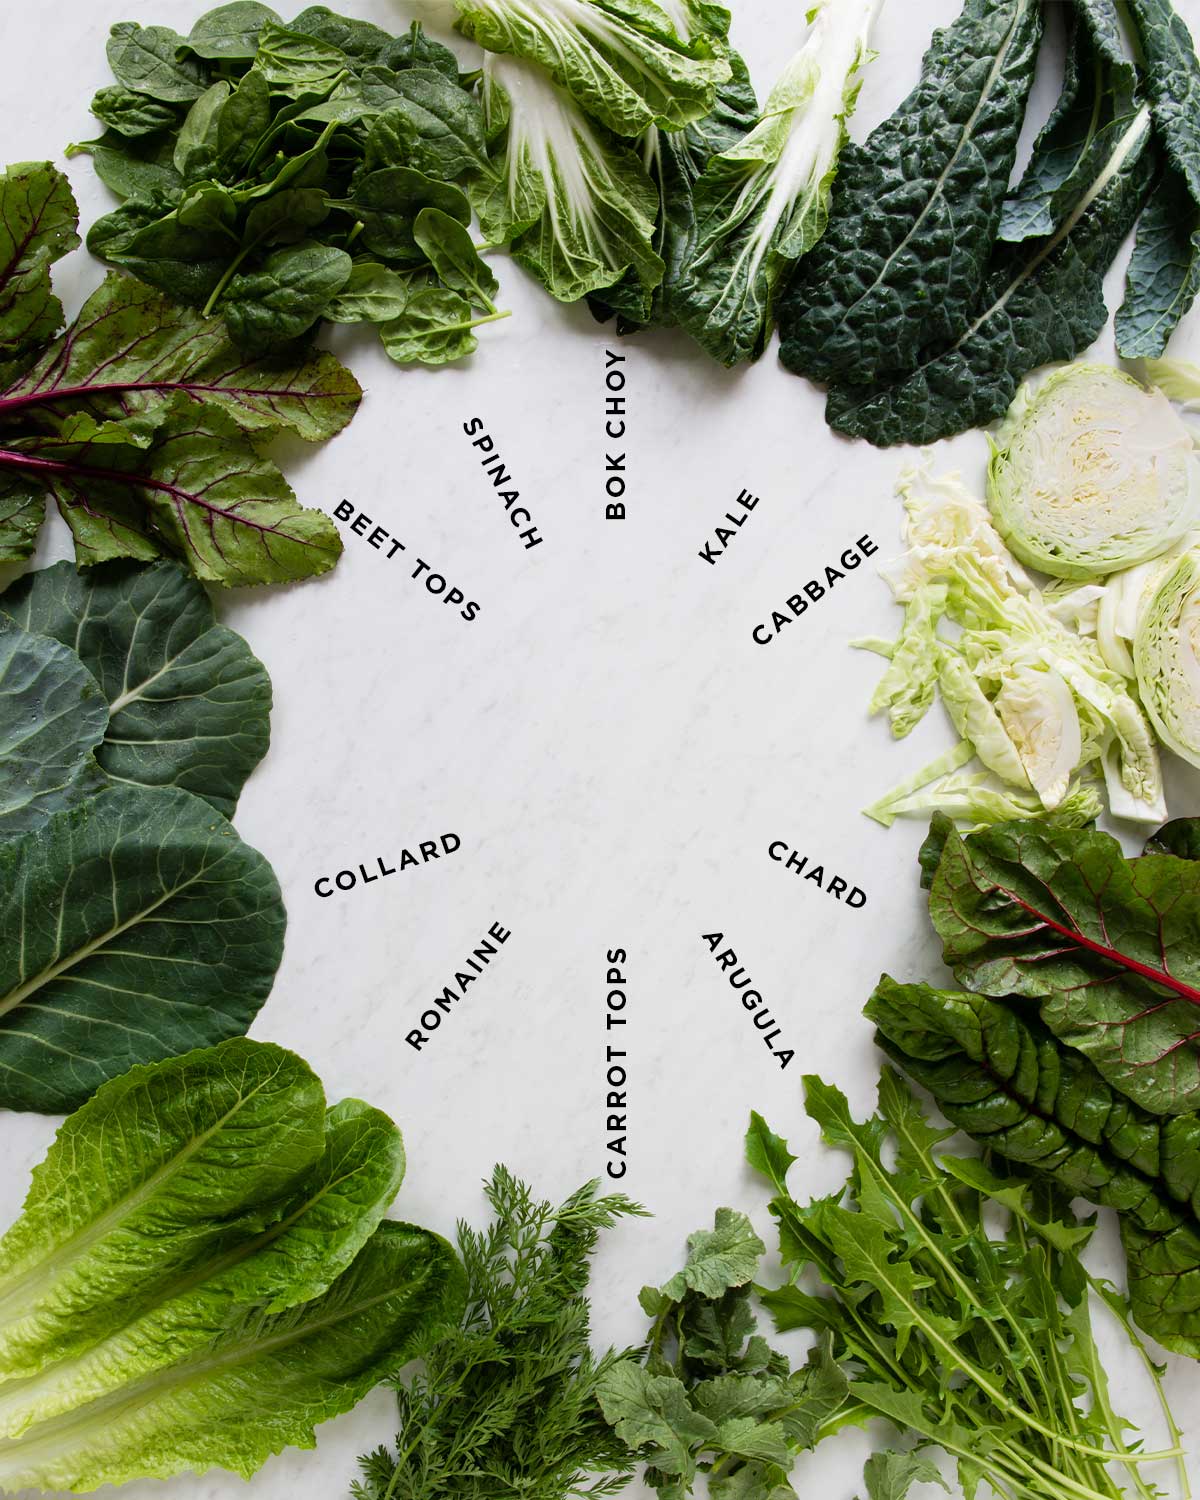 dark leafy greens in a circle with labels in the center including bok choy, kale, cabbage, chard, arugula, carrot tops, romaine, collard, beet tops and spinach.